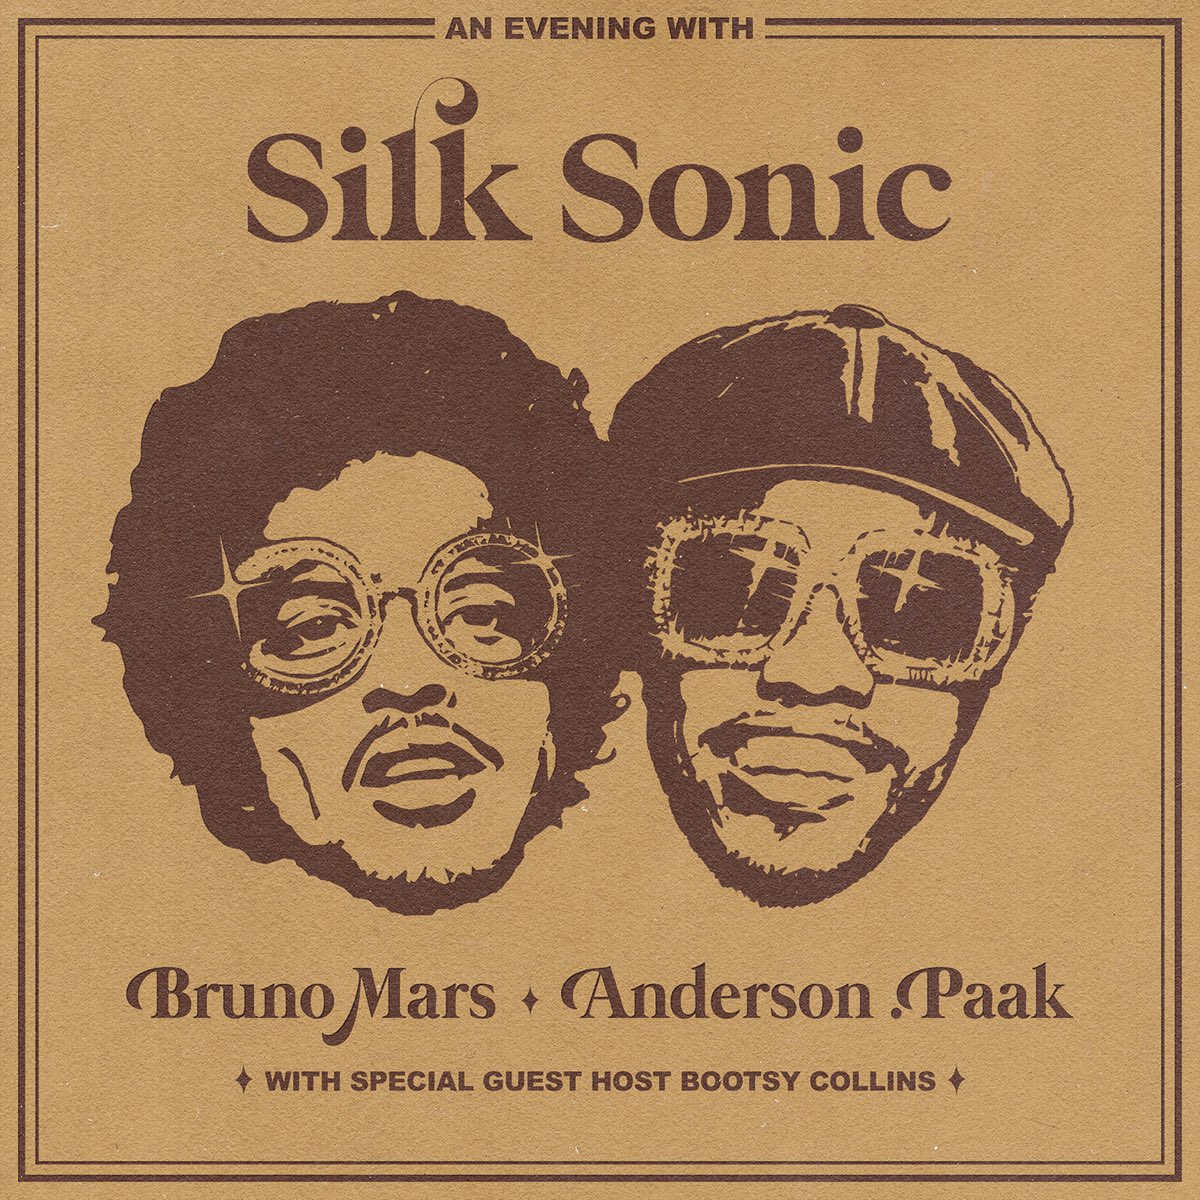 ‎an Evening With Silk Sonic By Bruno Mars Anderson Paak And Silk Sonic On Apple Music 